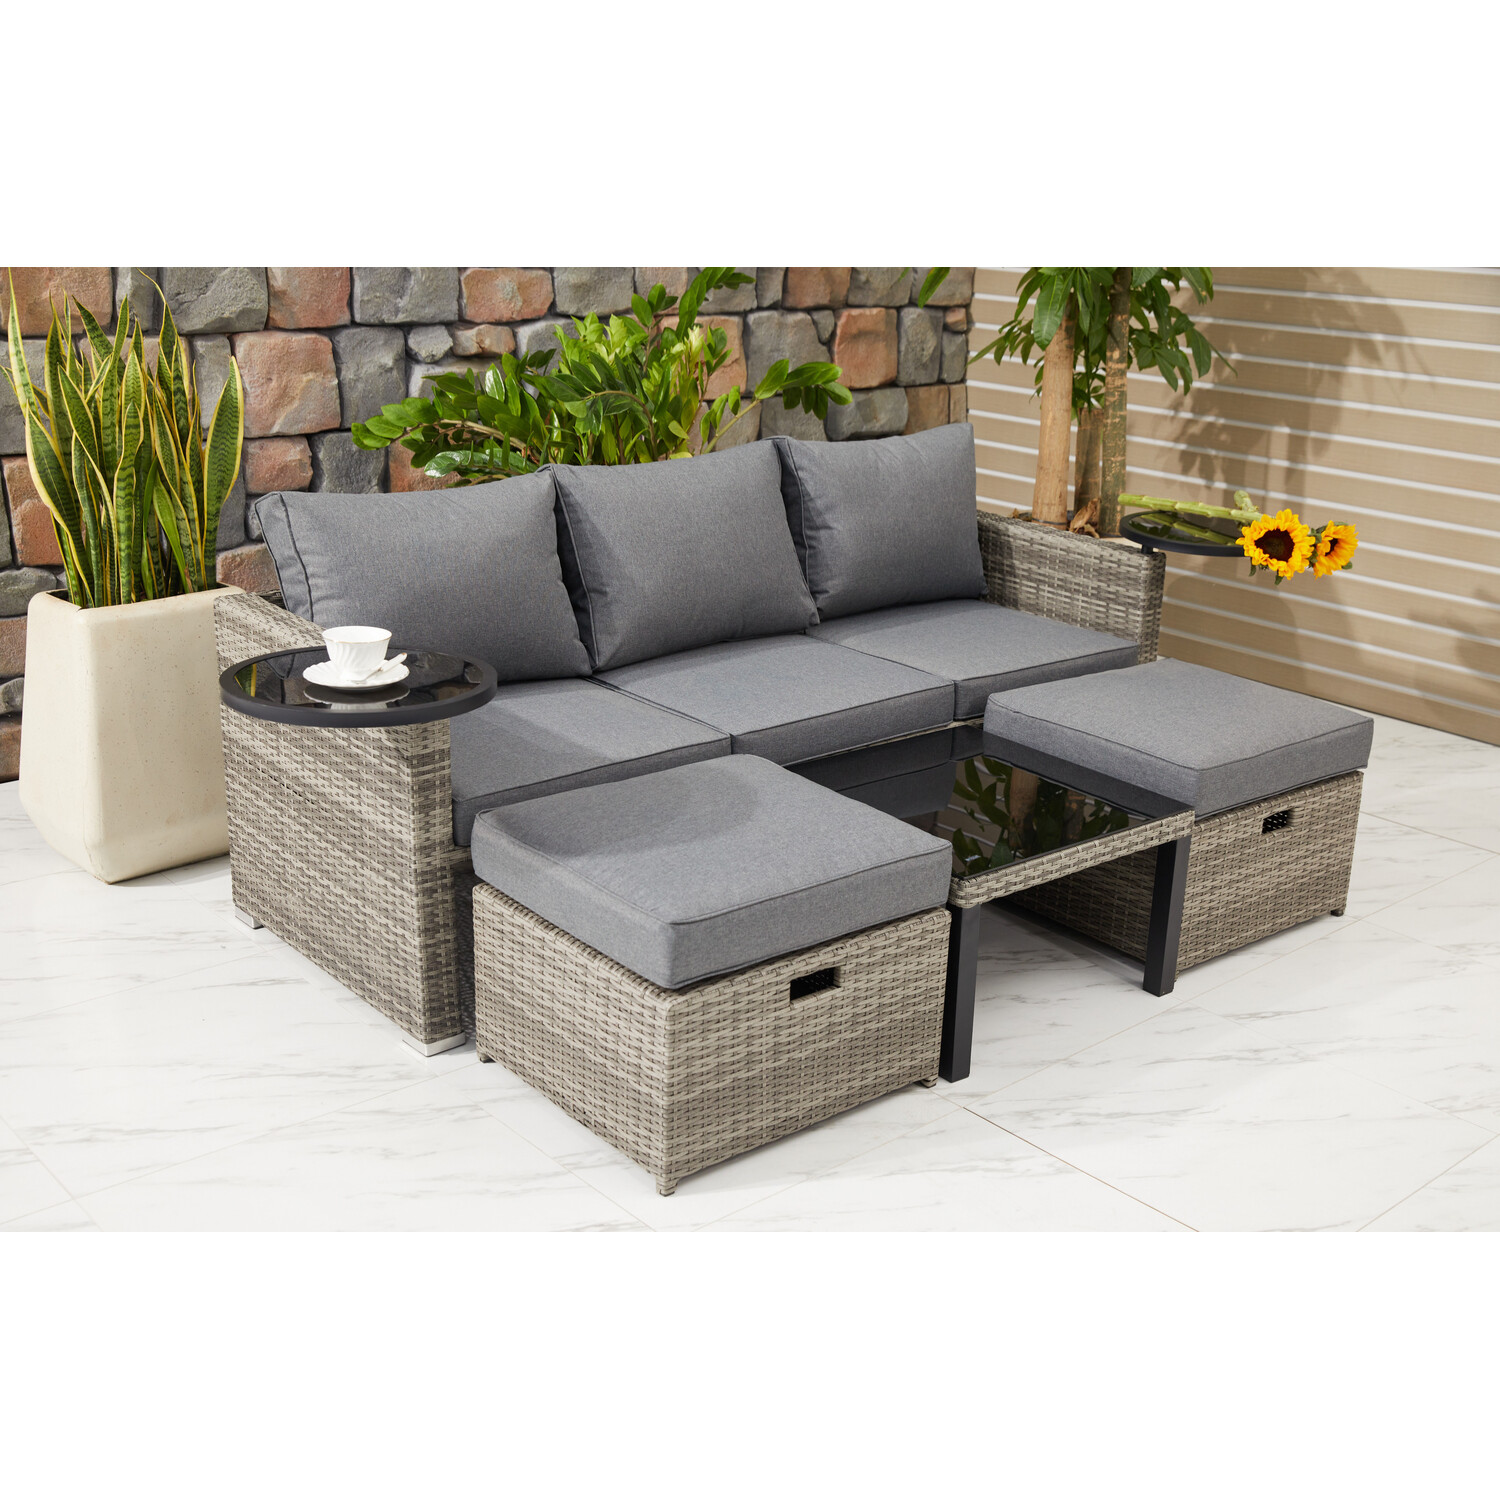 Malay Deluxe Malay New Hampshire 2 Seater Natural Transformer Patio Set Image 9